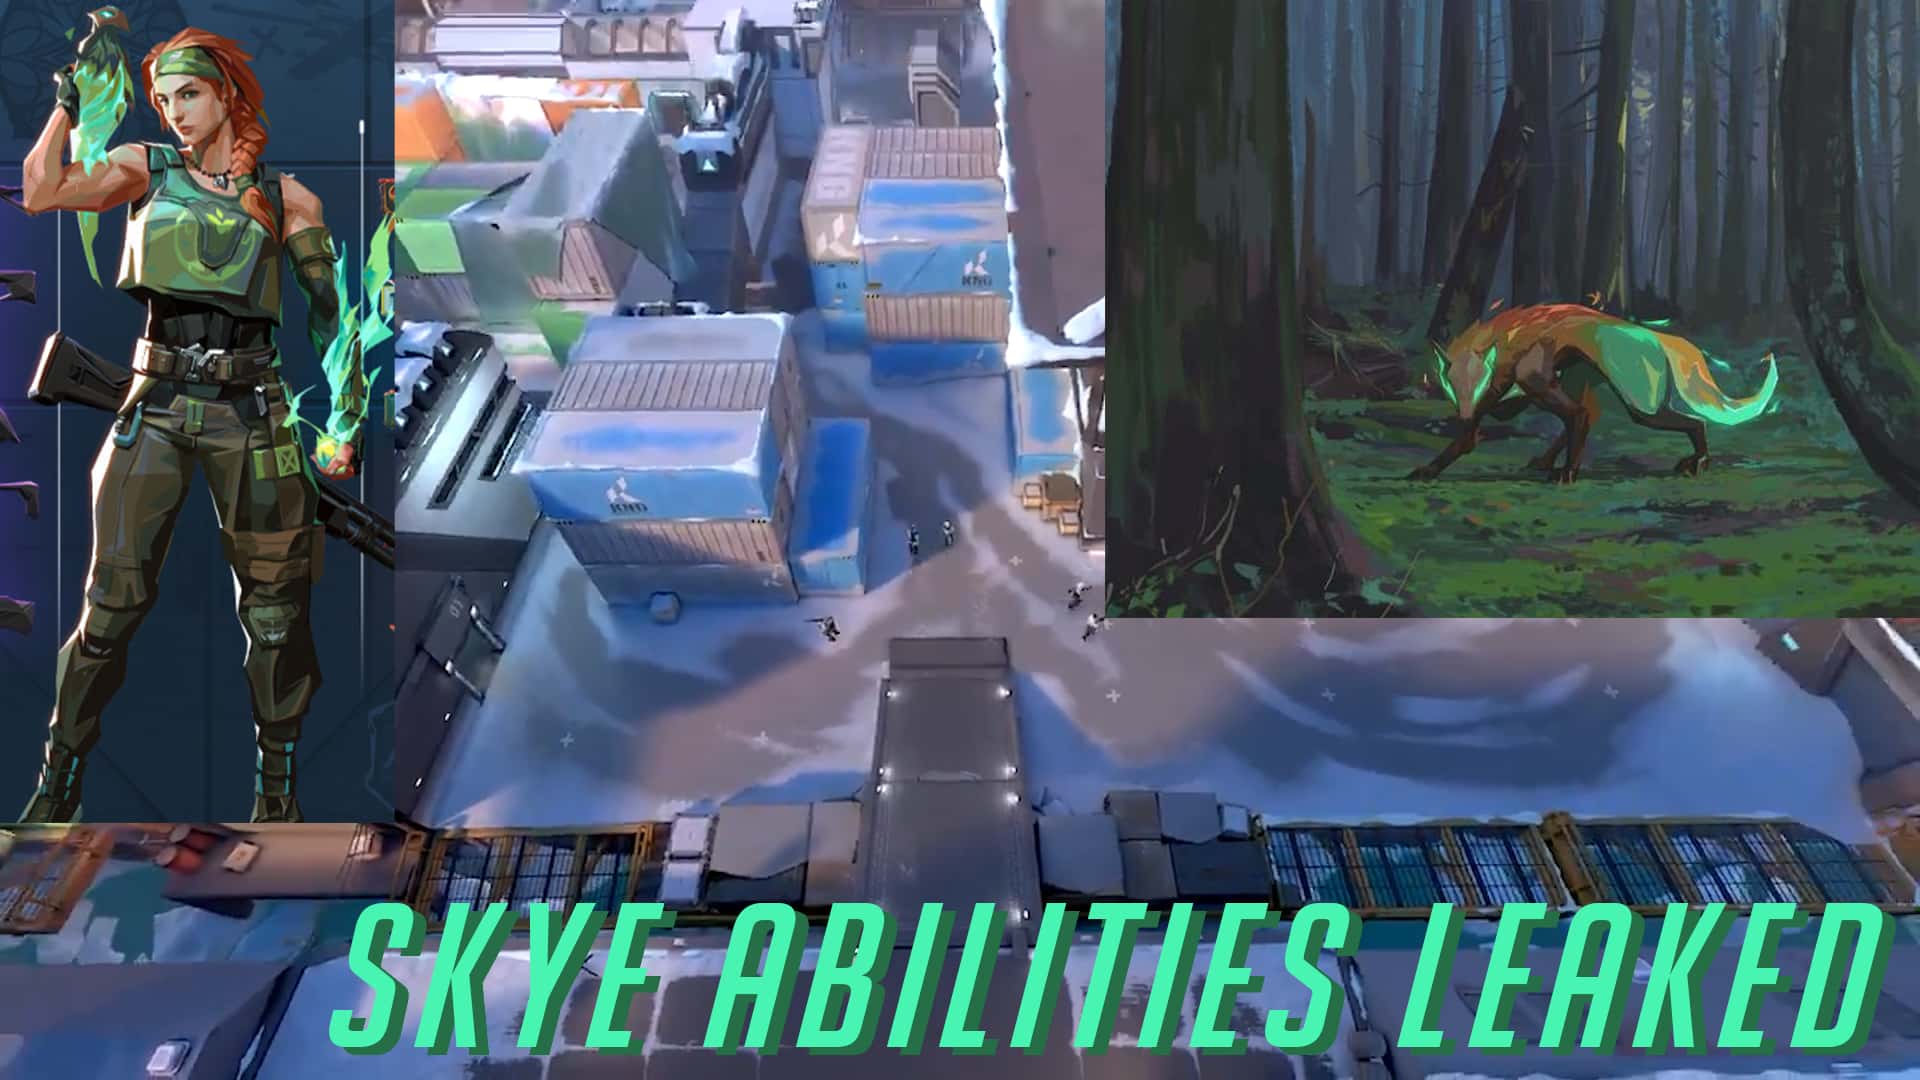 Upcoming Valorant Agent, Skye, Abilities Leaked Online